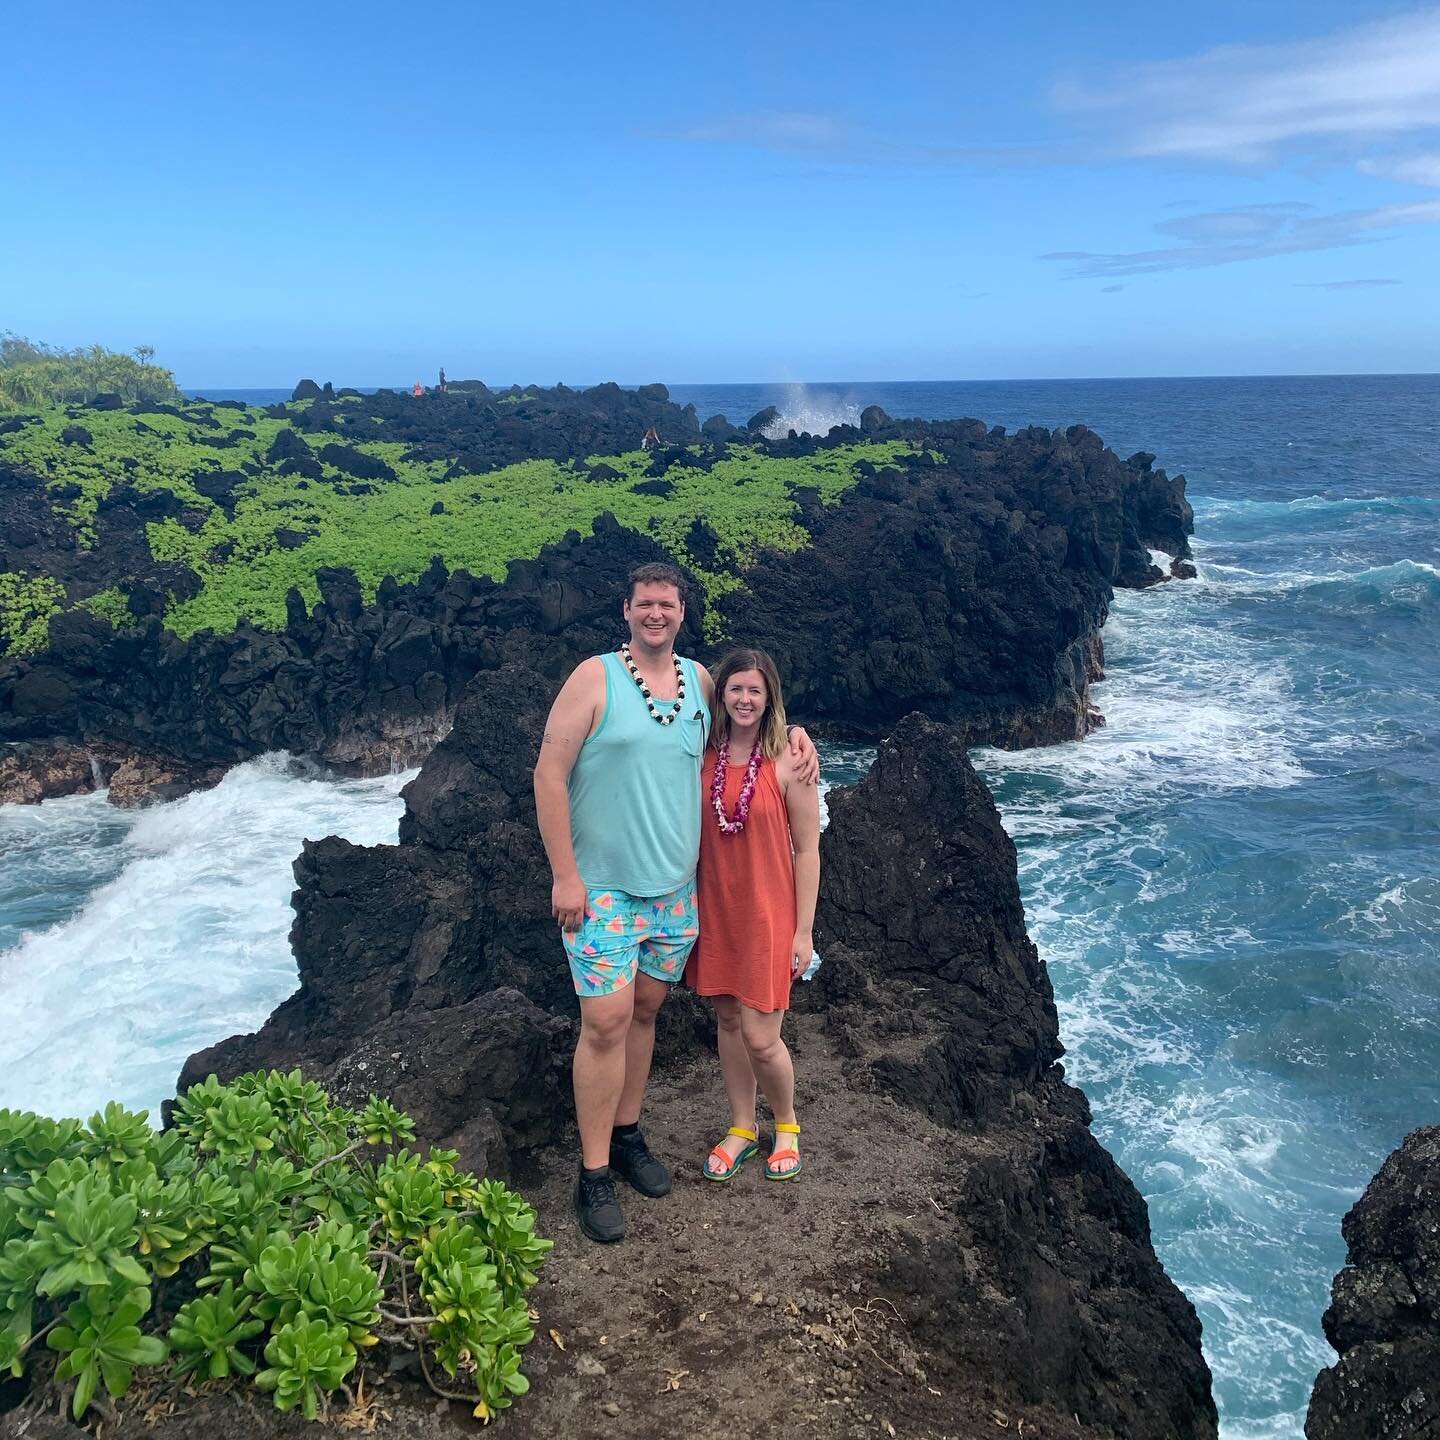 Mele Kalikimaka! 🎅🏼 🌺 🌊 We hitched a ride on Santa&rsquo;s sleigh after an incredible trip to Maui. I hope you find time to unplug and enjoy time with the ones you love. 💕 It&rsquo;s the most wonderful time of the year! #melekalikimaka #chadwell